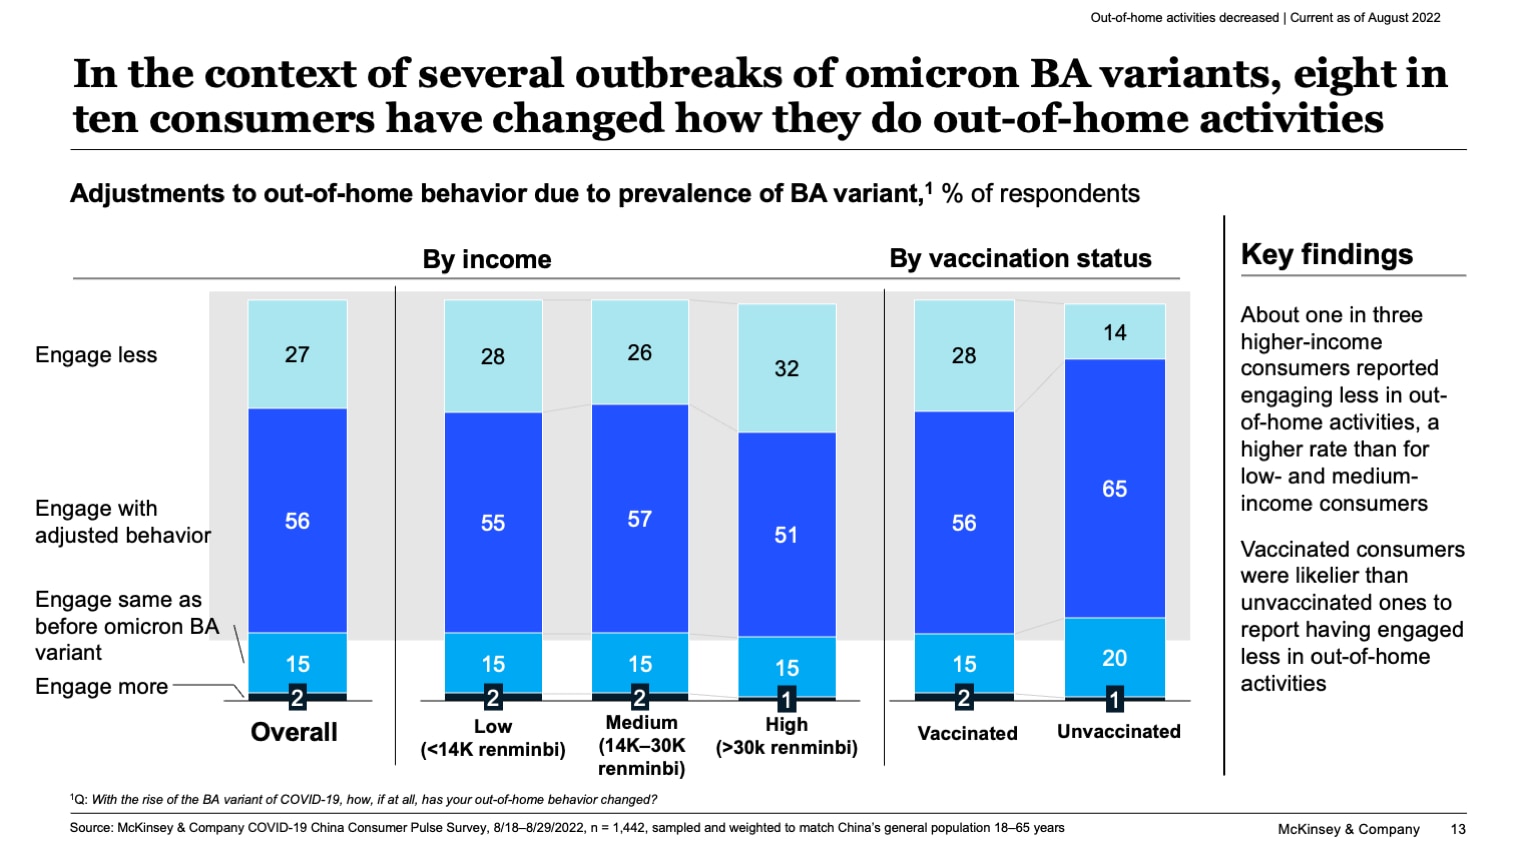 In the context of several outbreaks of omicron BA variants, eight in ten consumers have changed how they do out-of-home activities